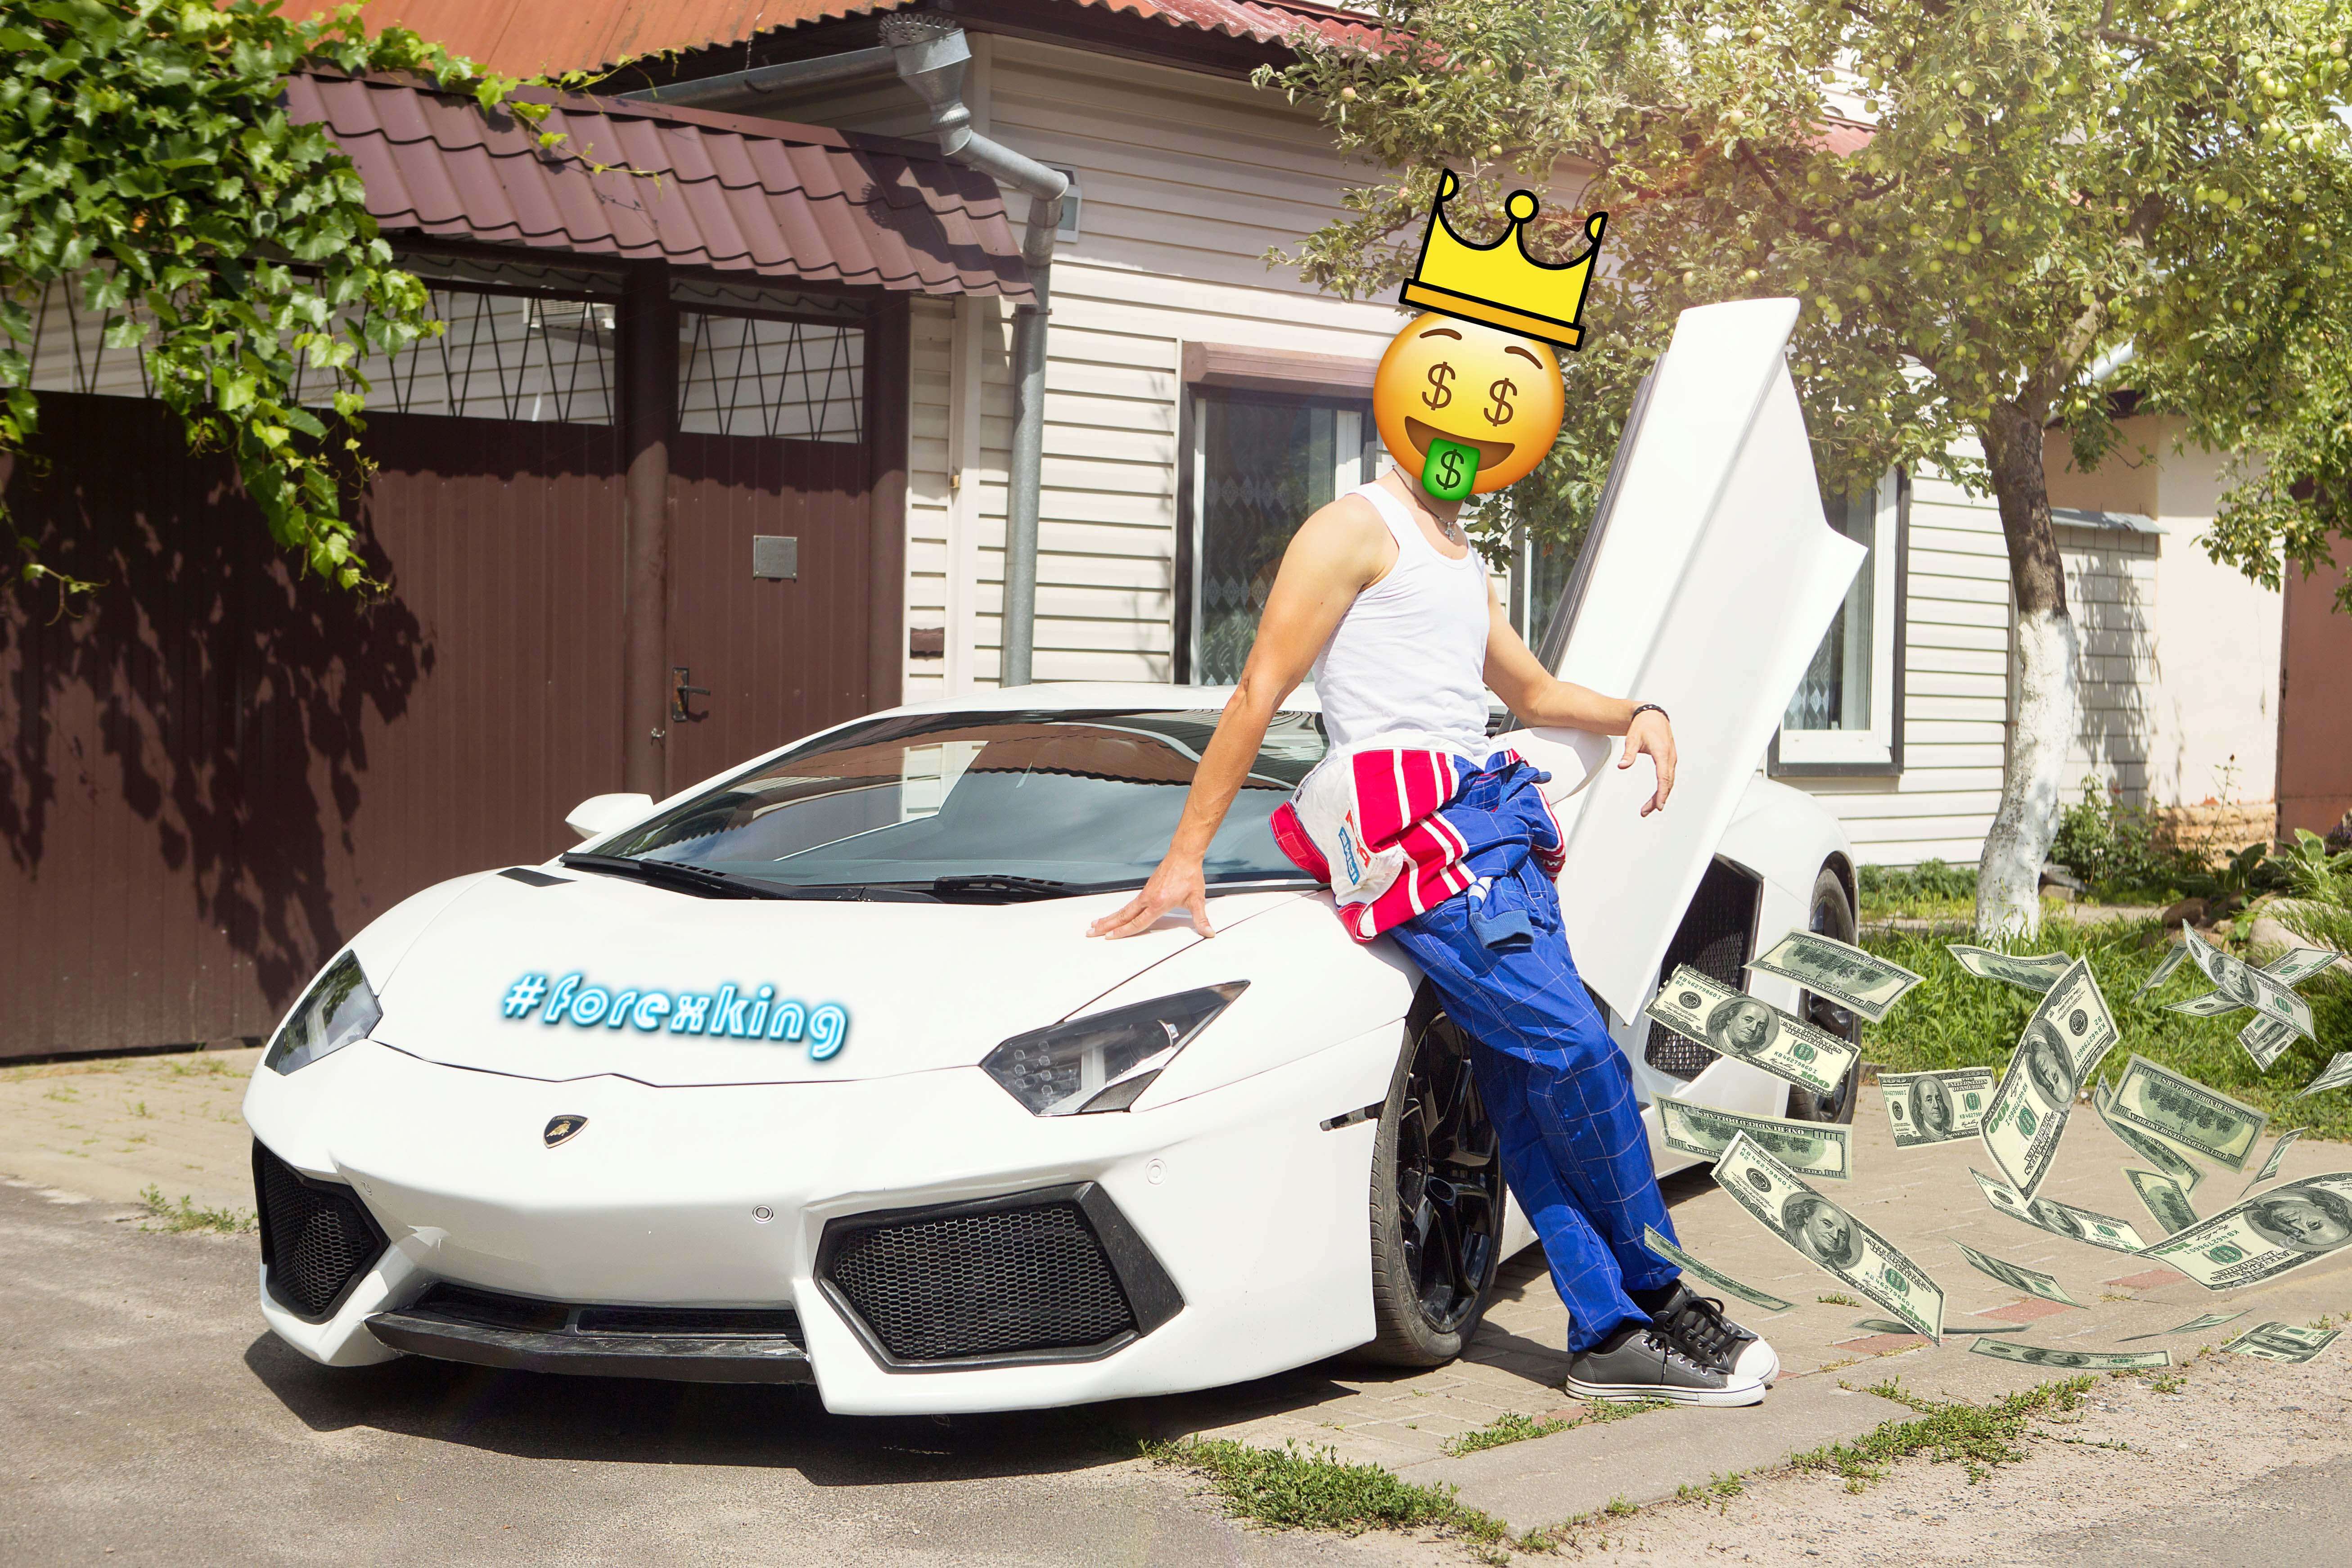 Man Standing next to supercar with cash and FOREXKING on the bonnet